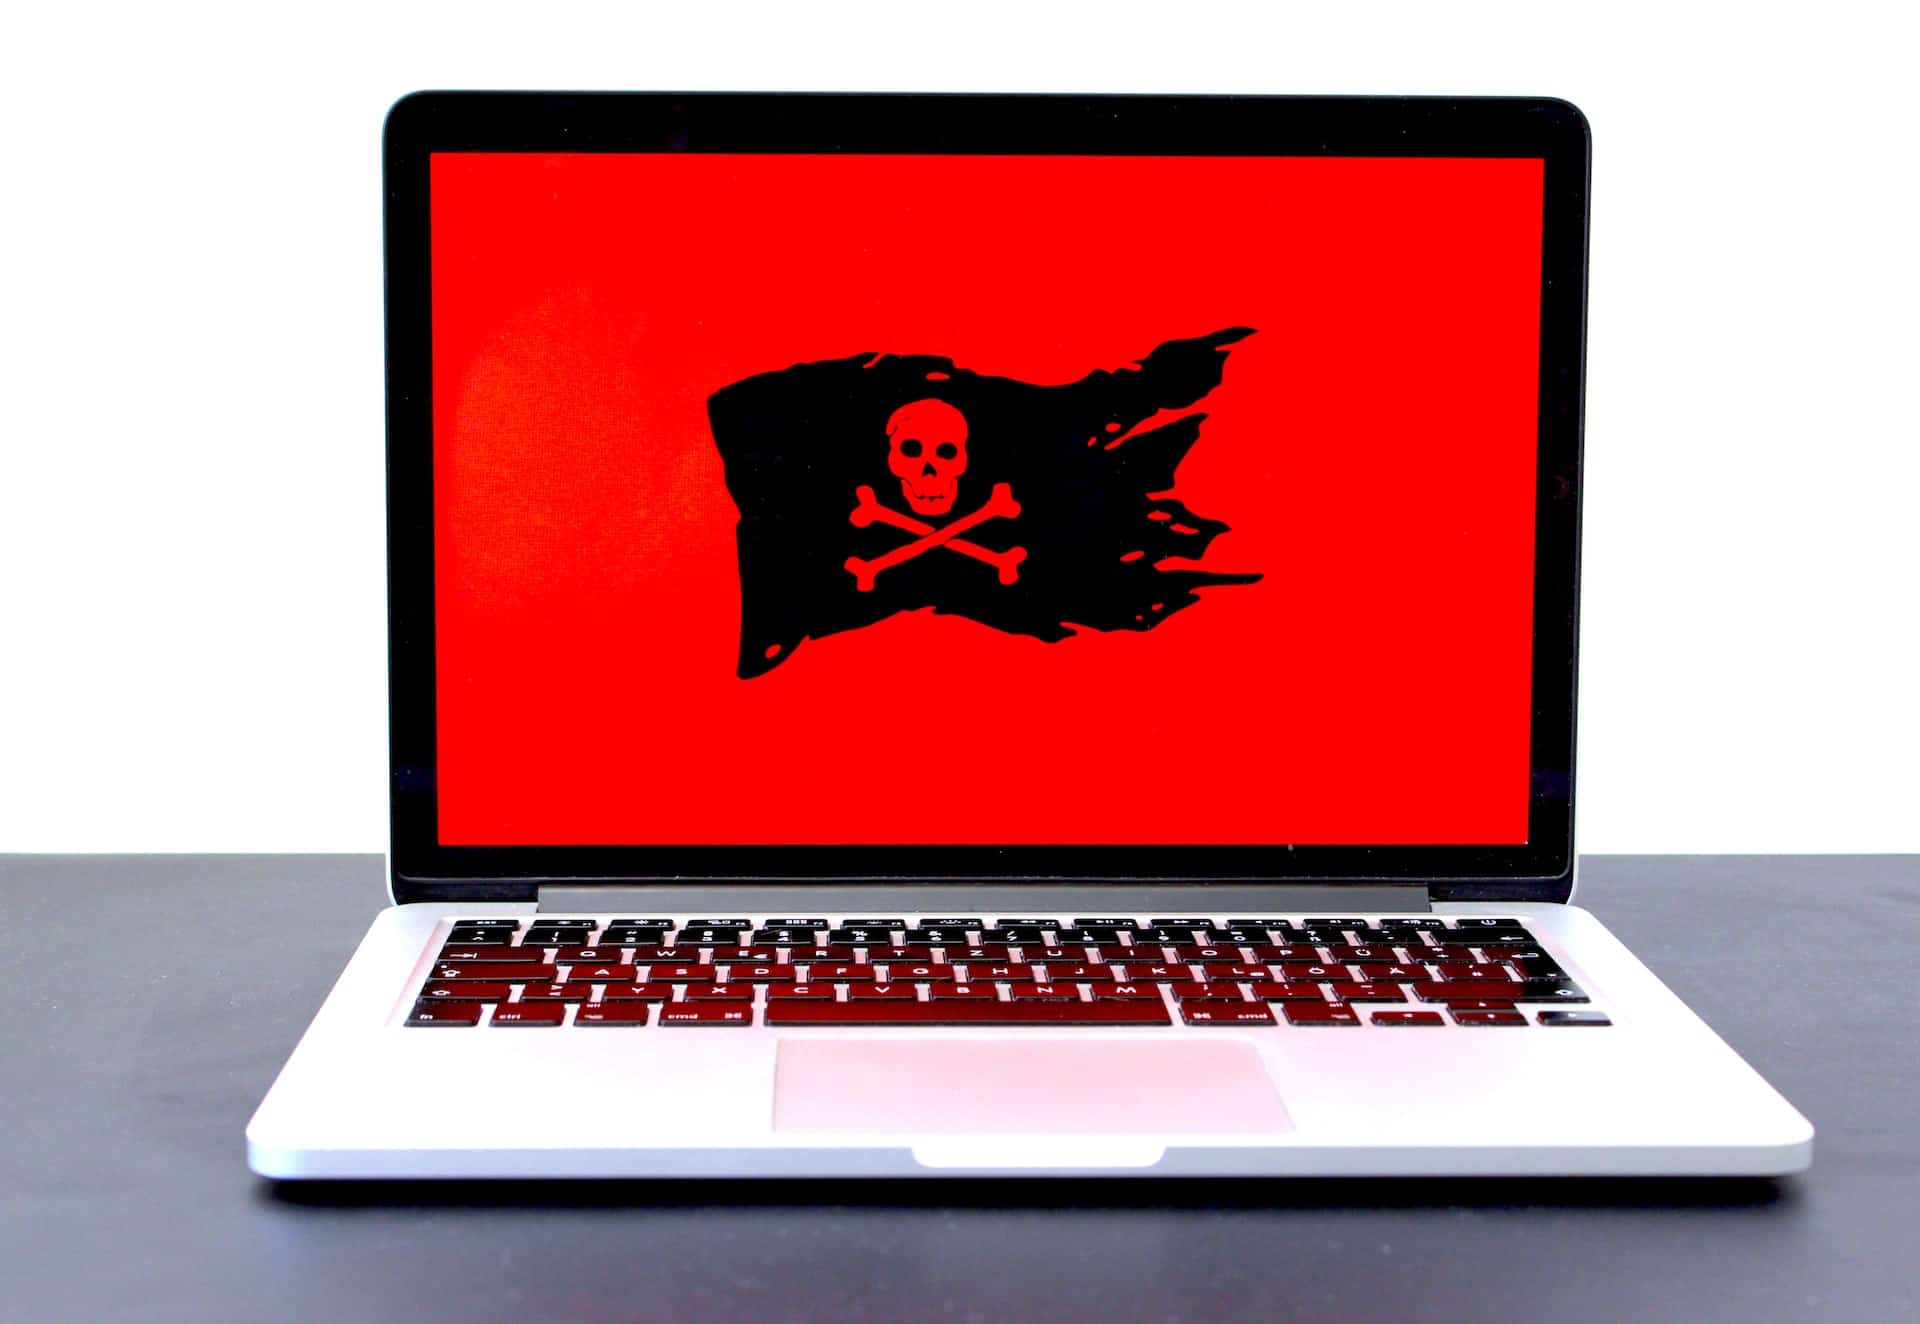 Laptop with a red background with a black pirate flag